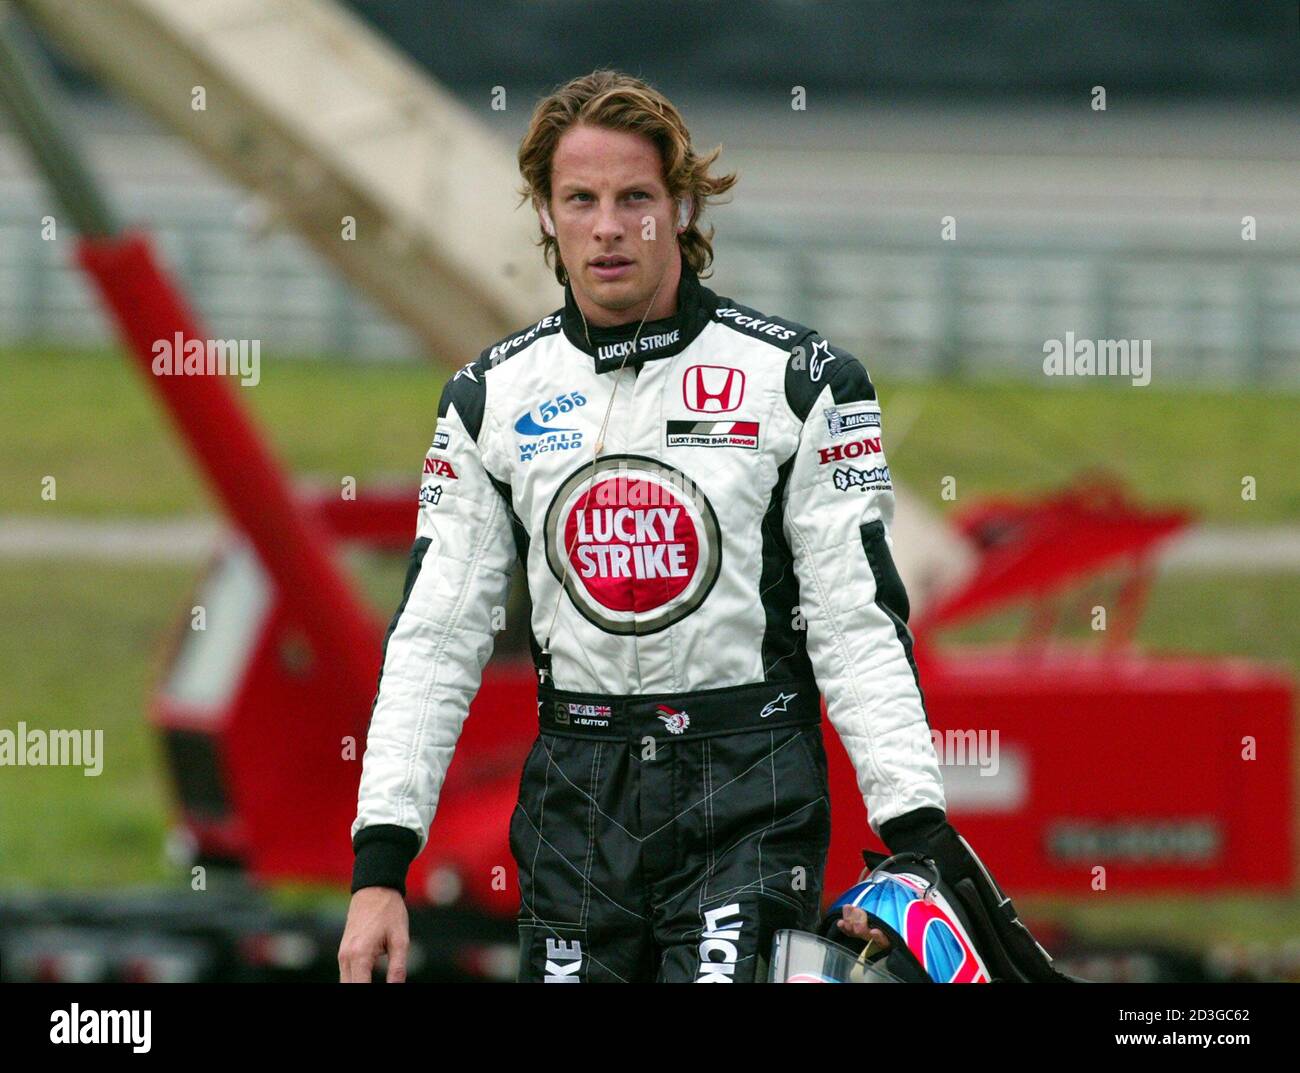 BAR Honda driver Jenson Button of Great Britain walks away from the track  after having to abandon his smoking car during the 2004 Brazil Grand Prix  in Sao Paulo, October 24, 2004.